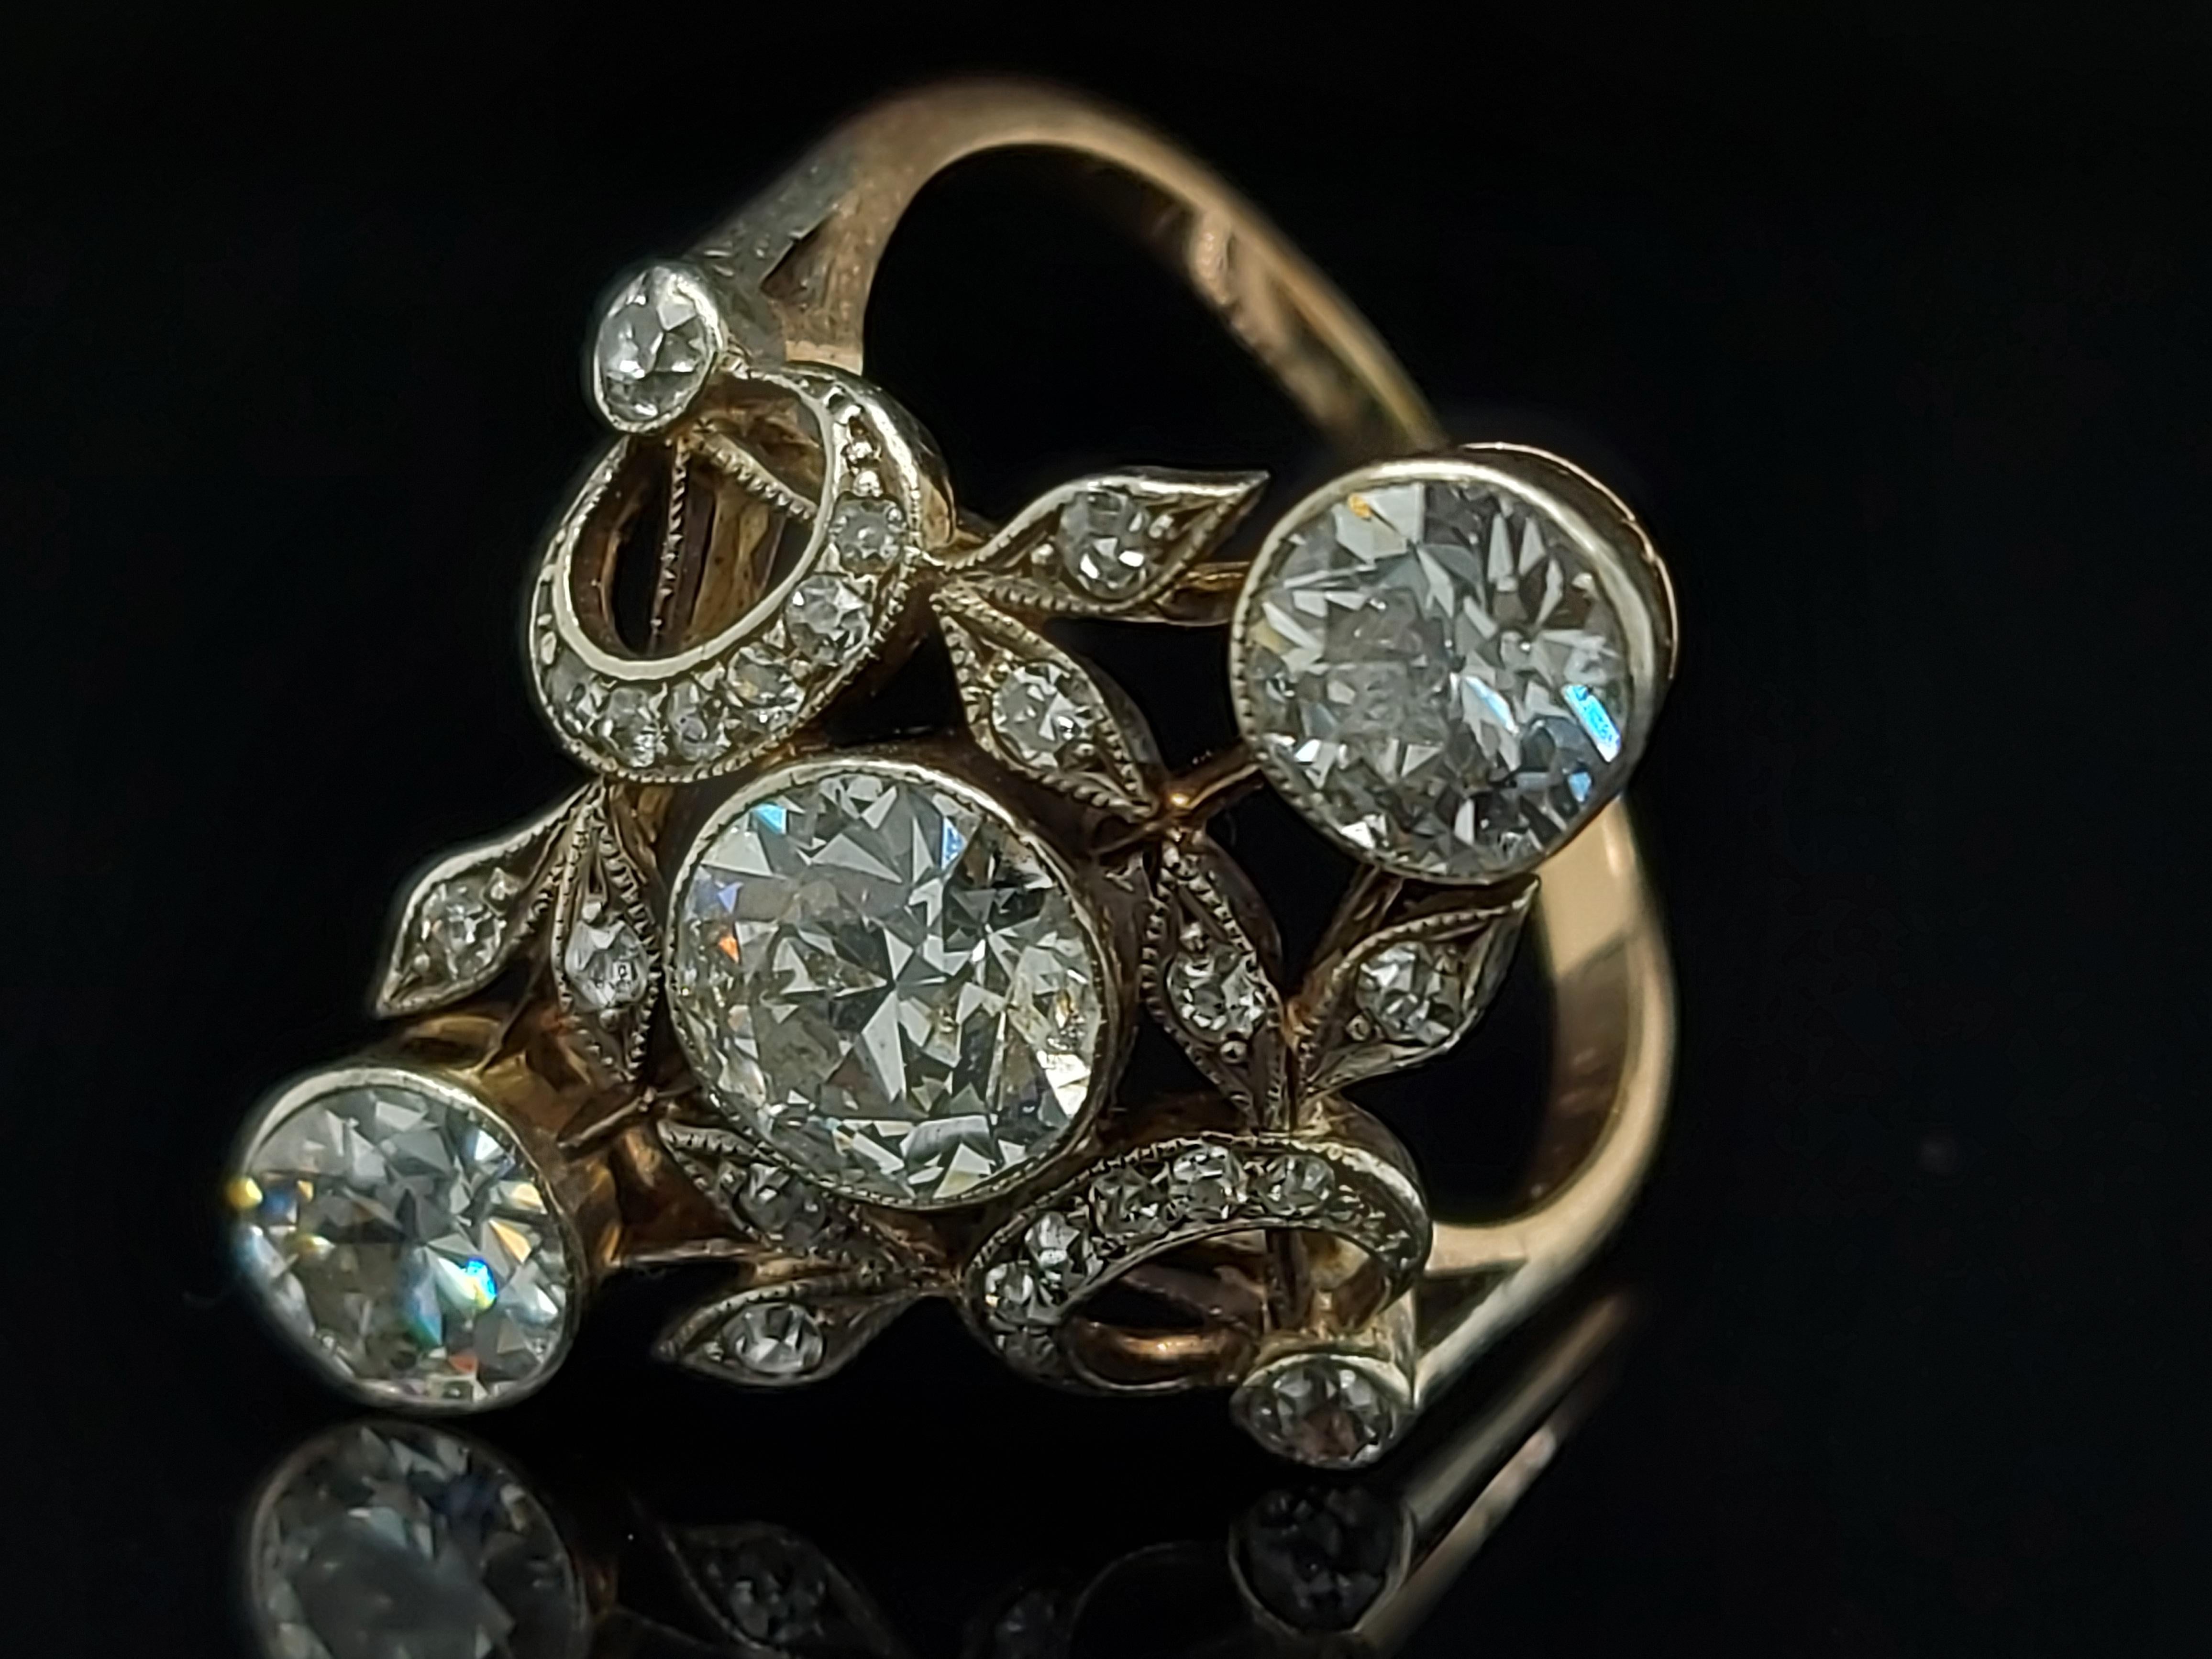 Artisan Stunning 18 Karat Gold and Silver Ring with Diamonds from the 1900s, Trilogy For Sale